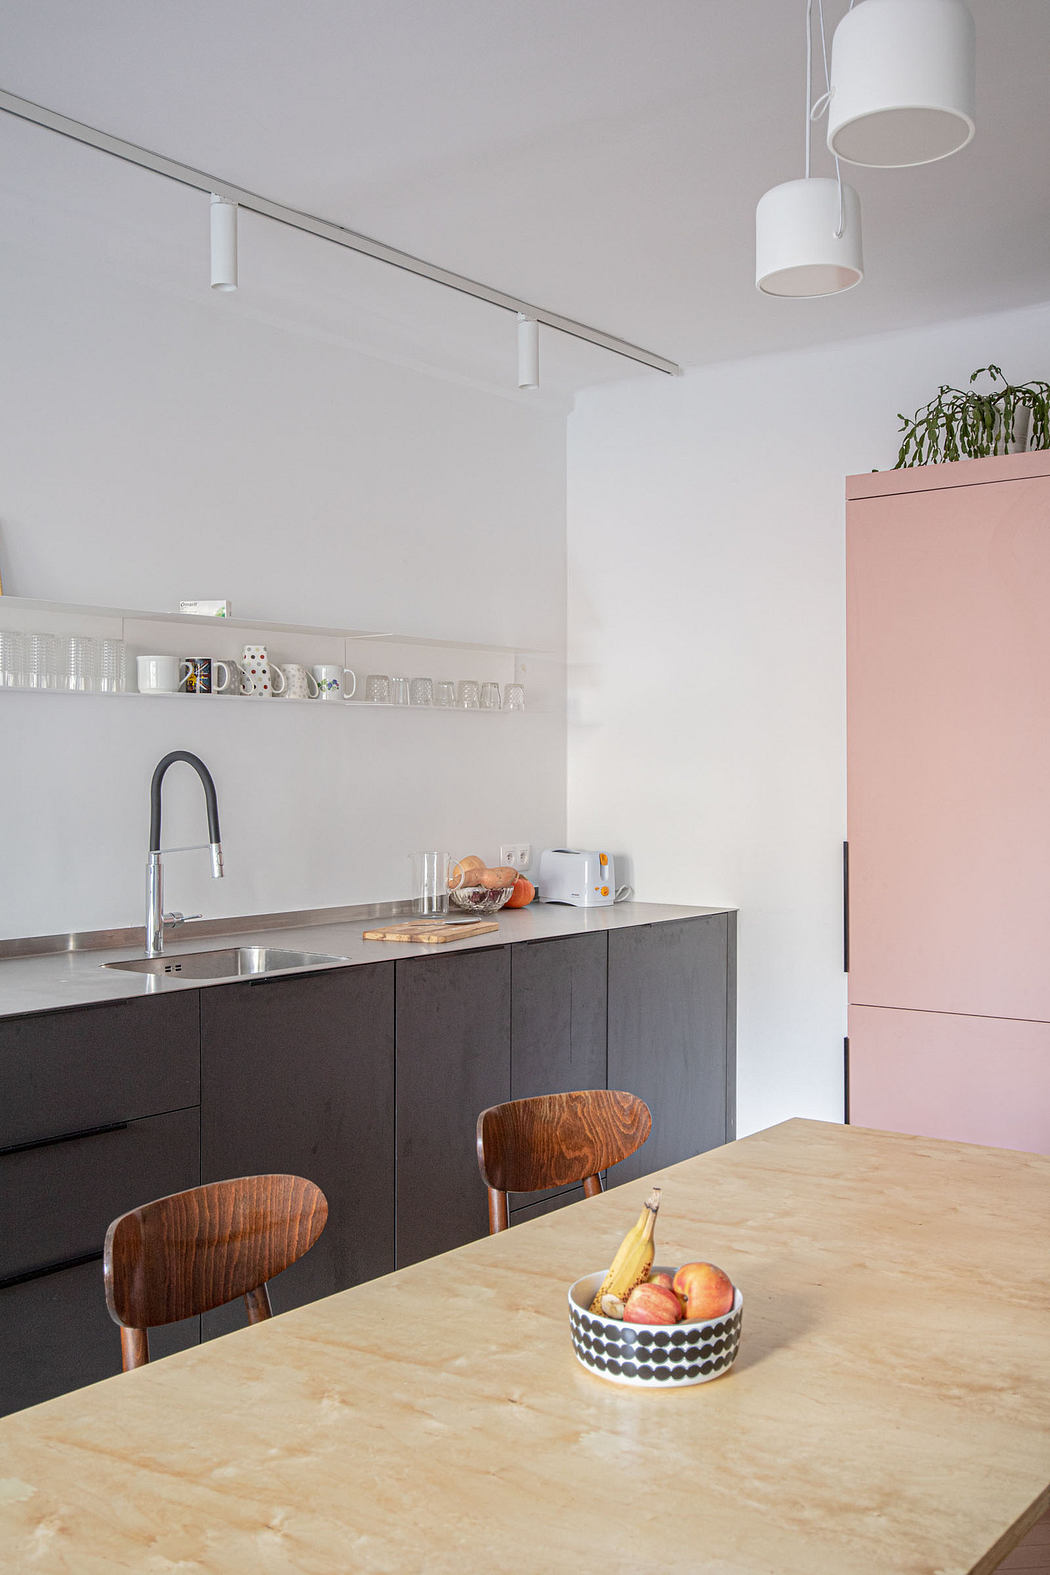 Modern kitchen with pink cabinet, dark counters, and wooden table.